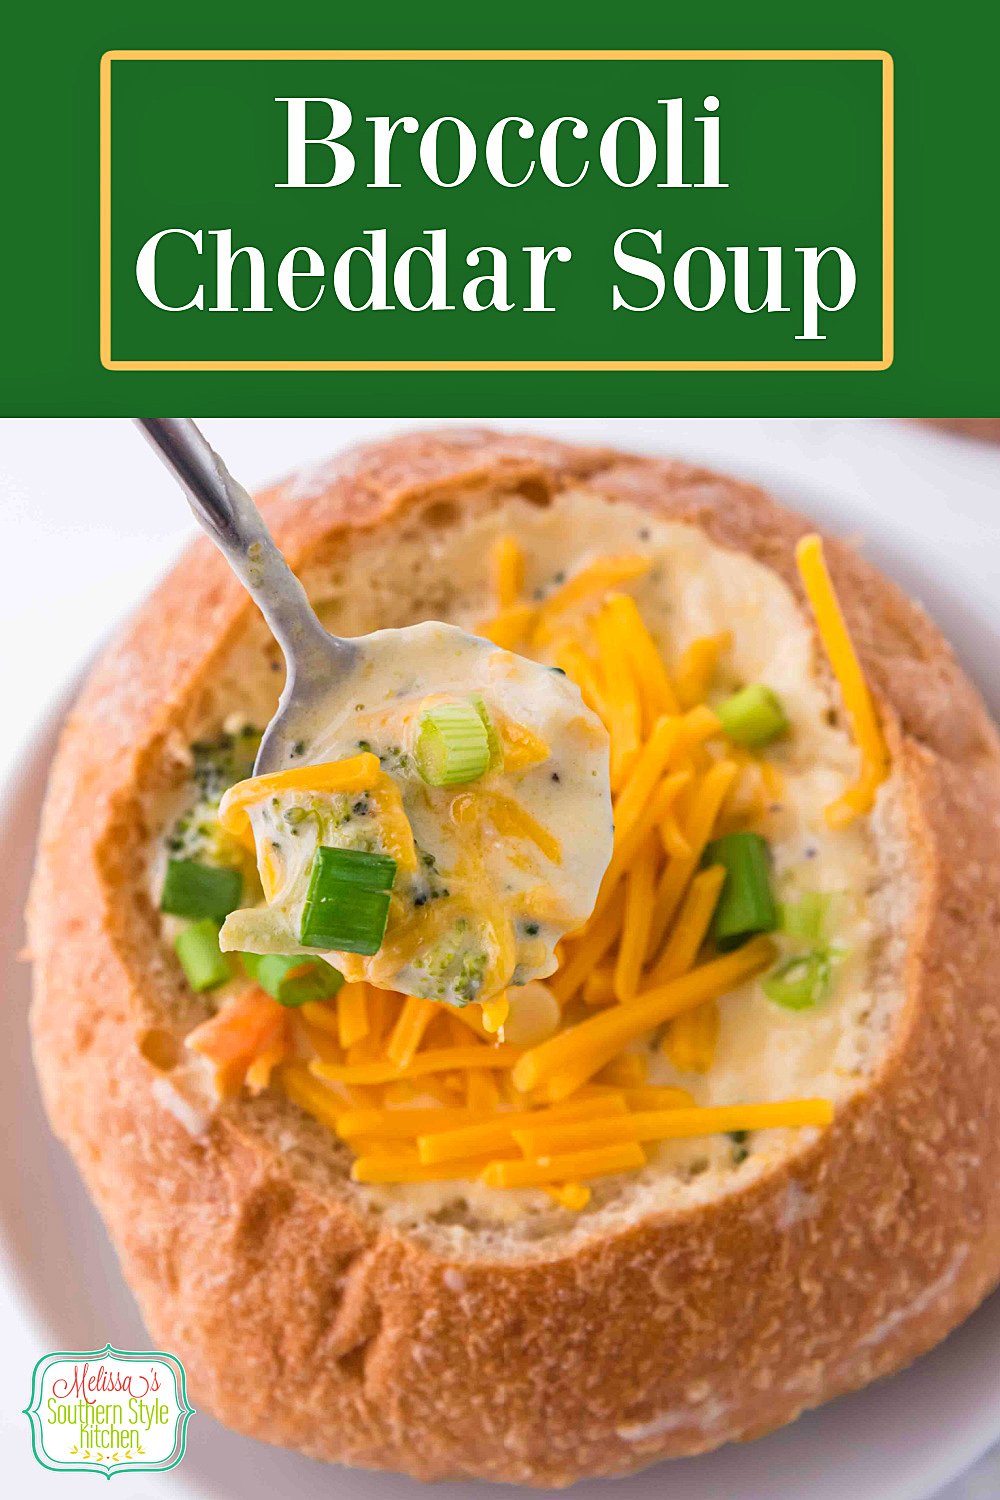 This Copycat Broccoli Cheddar Soup features fresh broccoli florets, carrots and onions and a perfectly seasoned cheddar cheese broth #broccolicheesesoup #copycatbroccolicheddarsoup #panerabroccolicheddarsoup #broccolicheese #broccolicheeserecipes #souprecipes